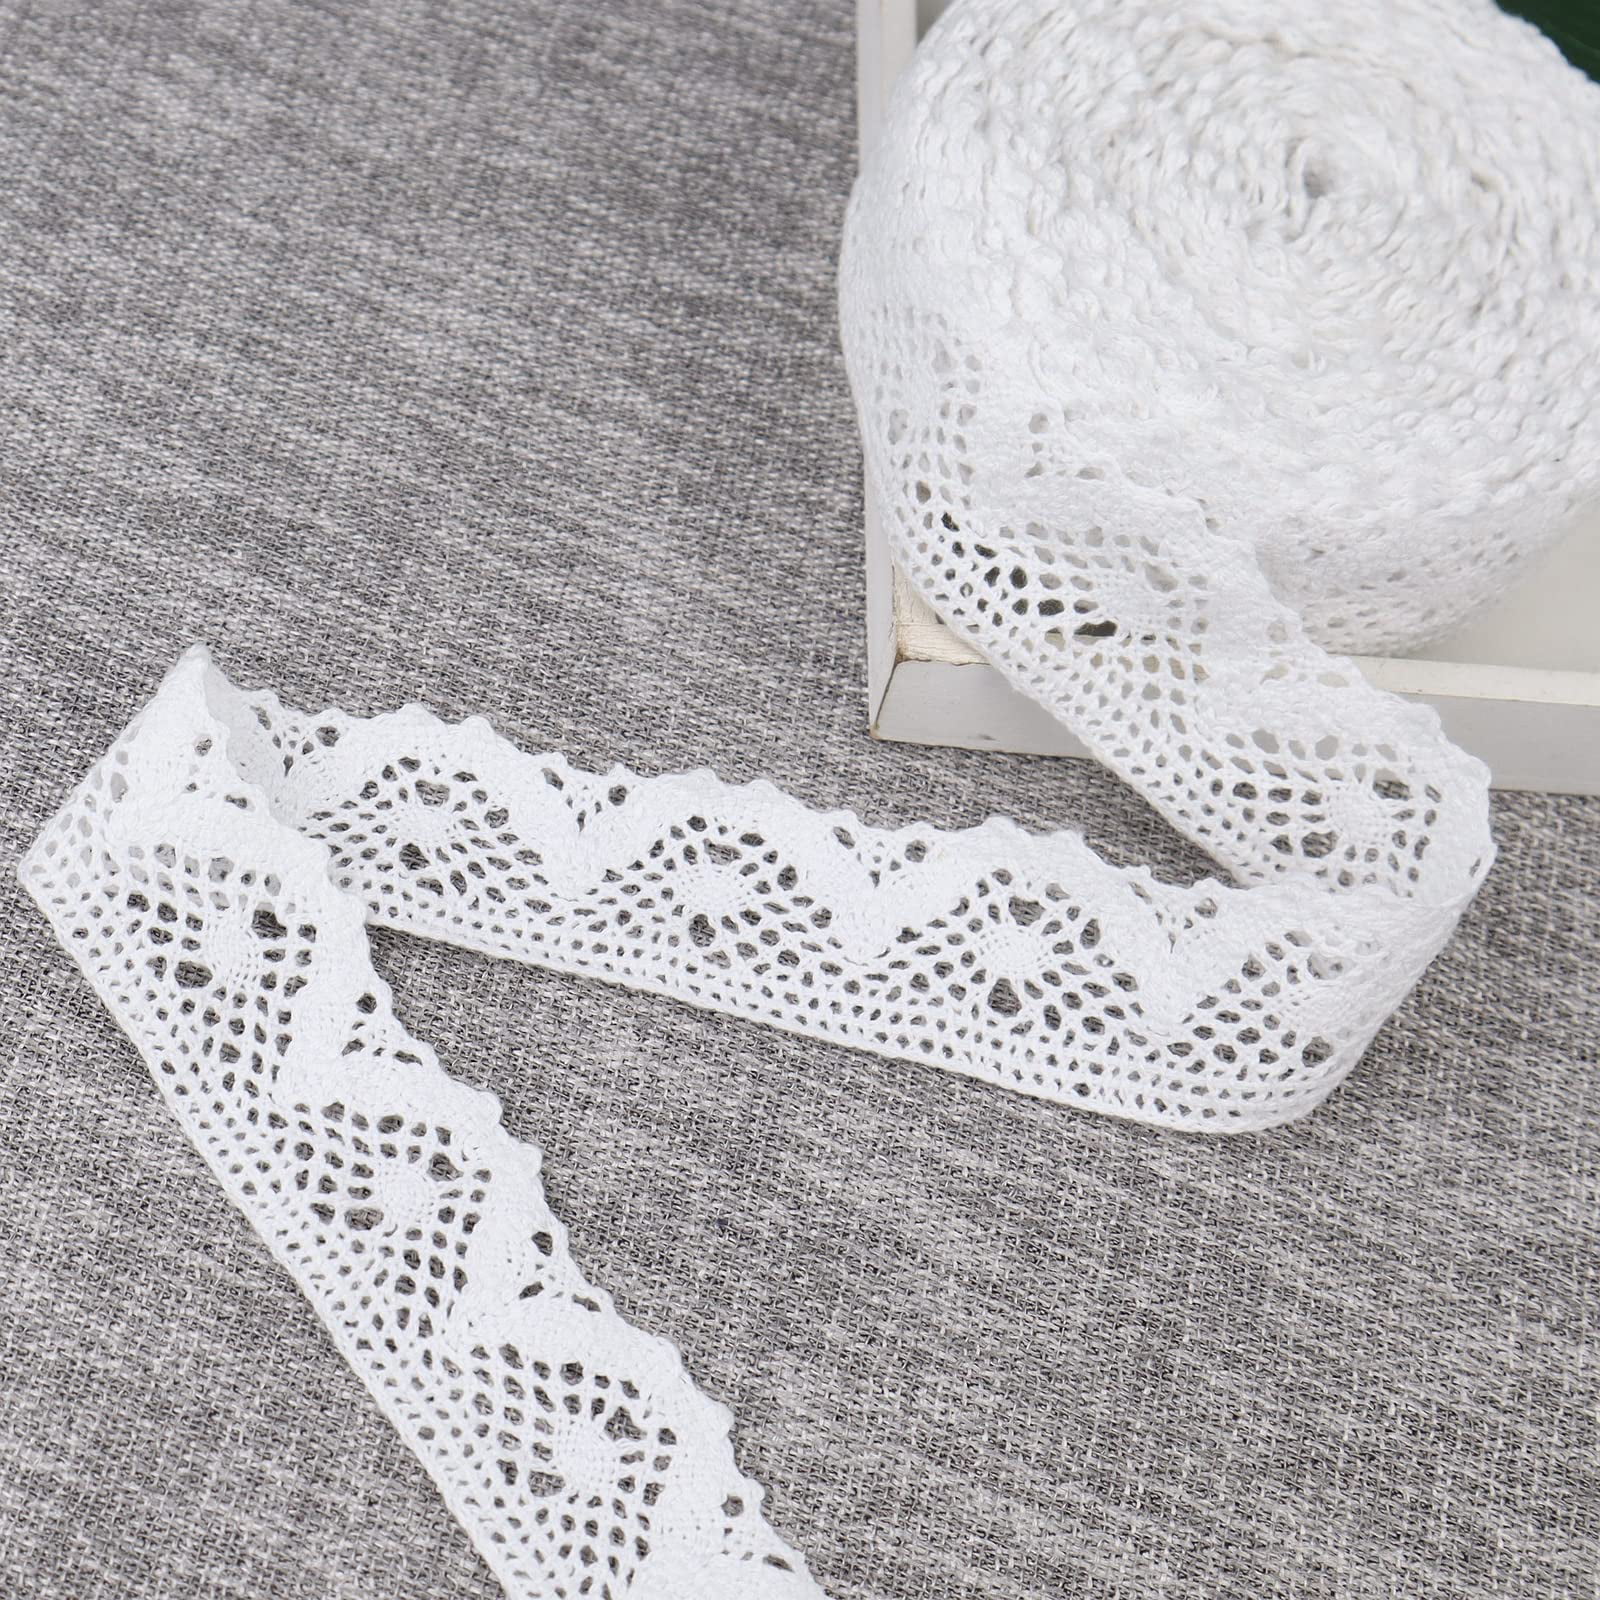 CT CRAFT LLC White Lace Trim Ribbon, Sewing Lace for Trimmings Works, Home  Decoration, Gift Wrapping, DIY Crafts, Baby Shower, 1.5 Inch (35mm) X 10